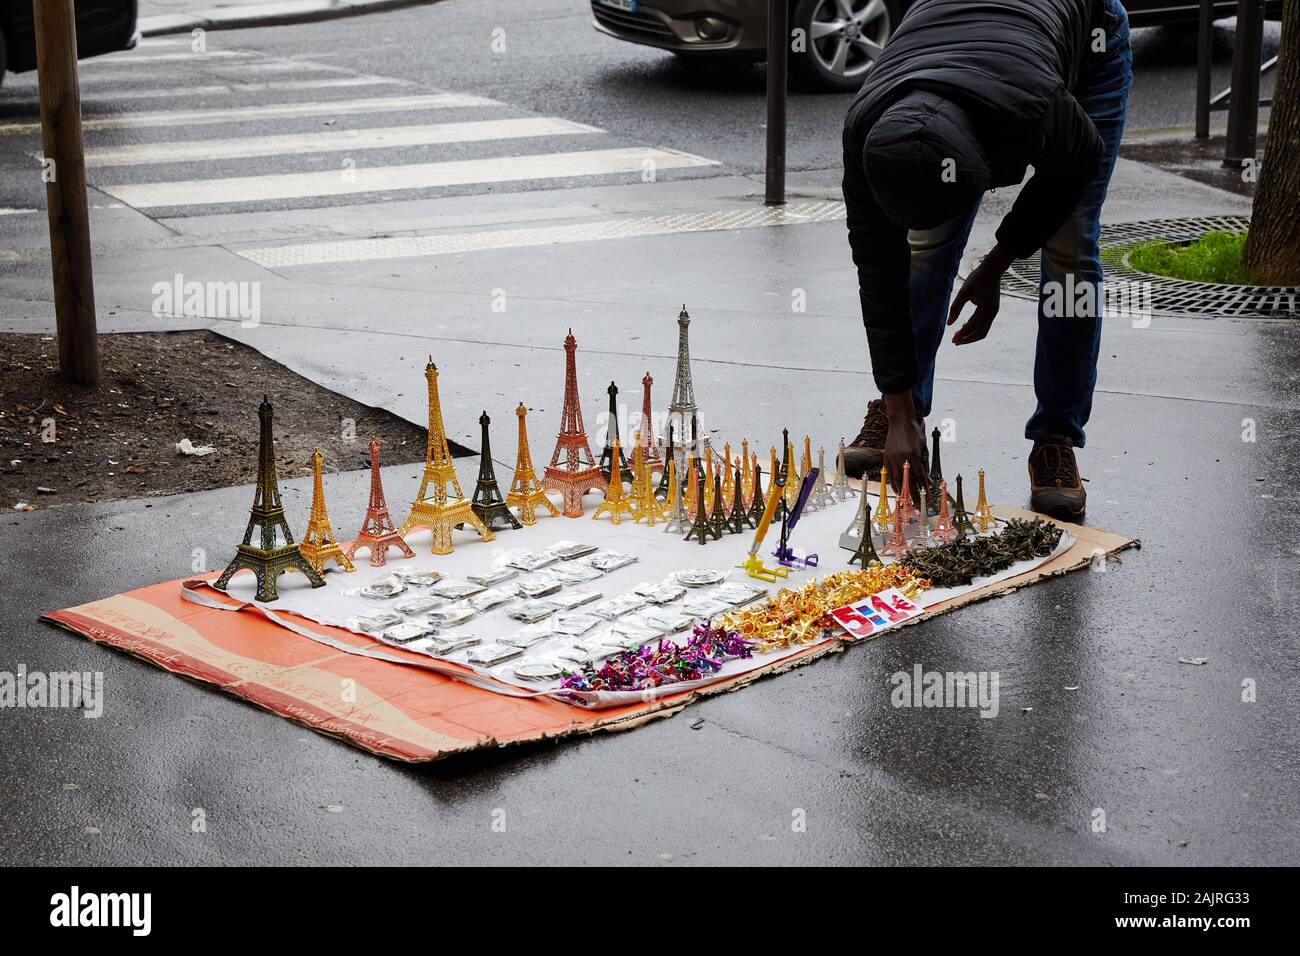 Man selling miniature Eiffel Towers, spread out on a piece of cardboard on a wet street; Paris, France Stock Photo